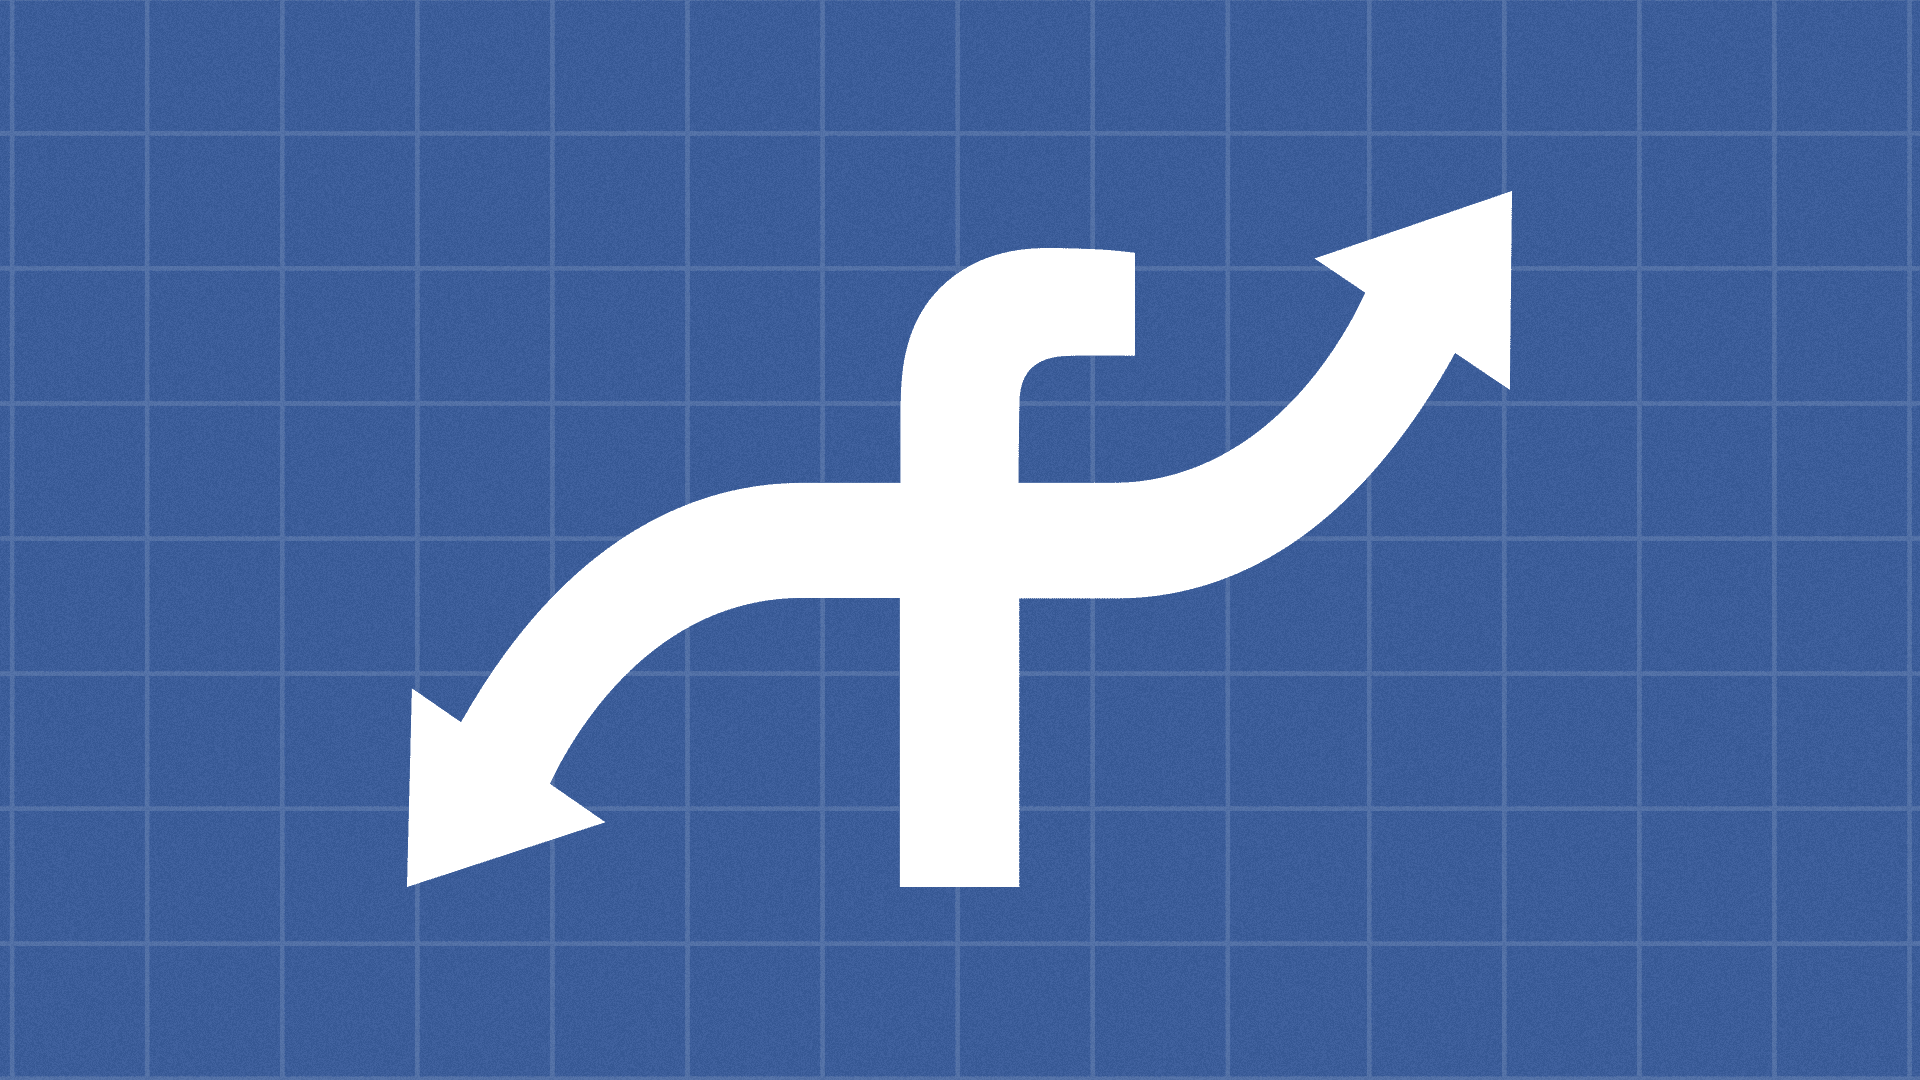 Illustration of the Facebook logo as a stock chart